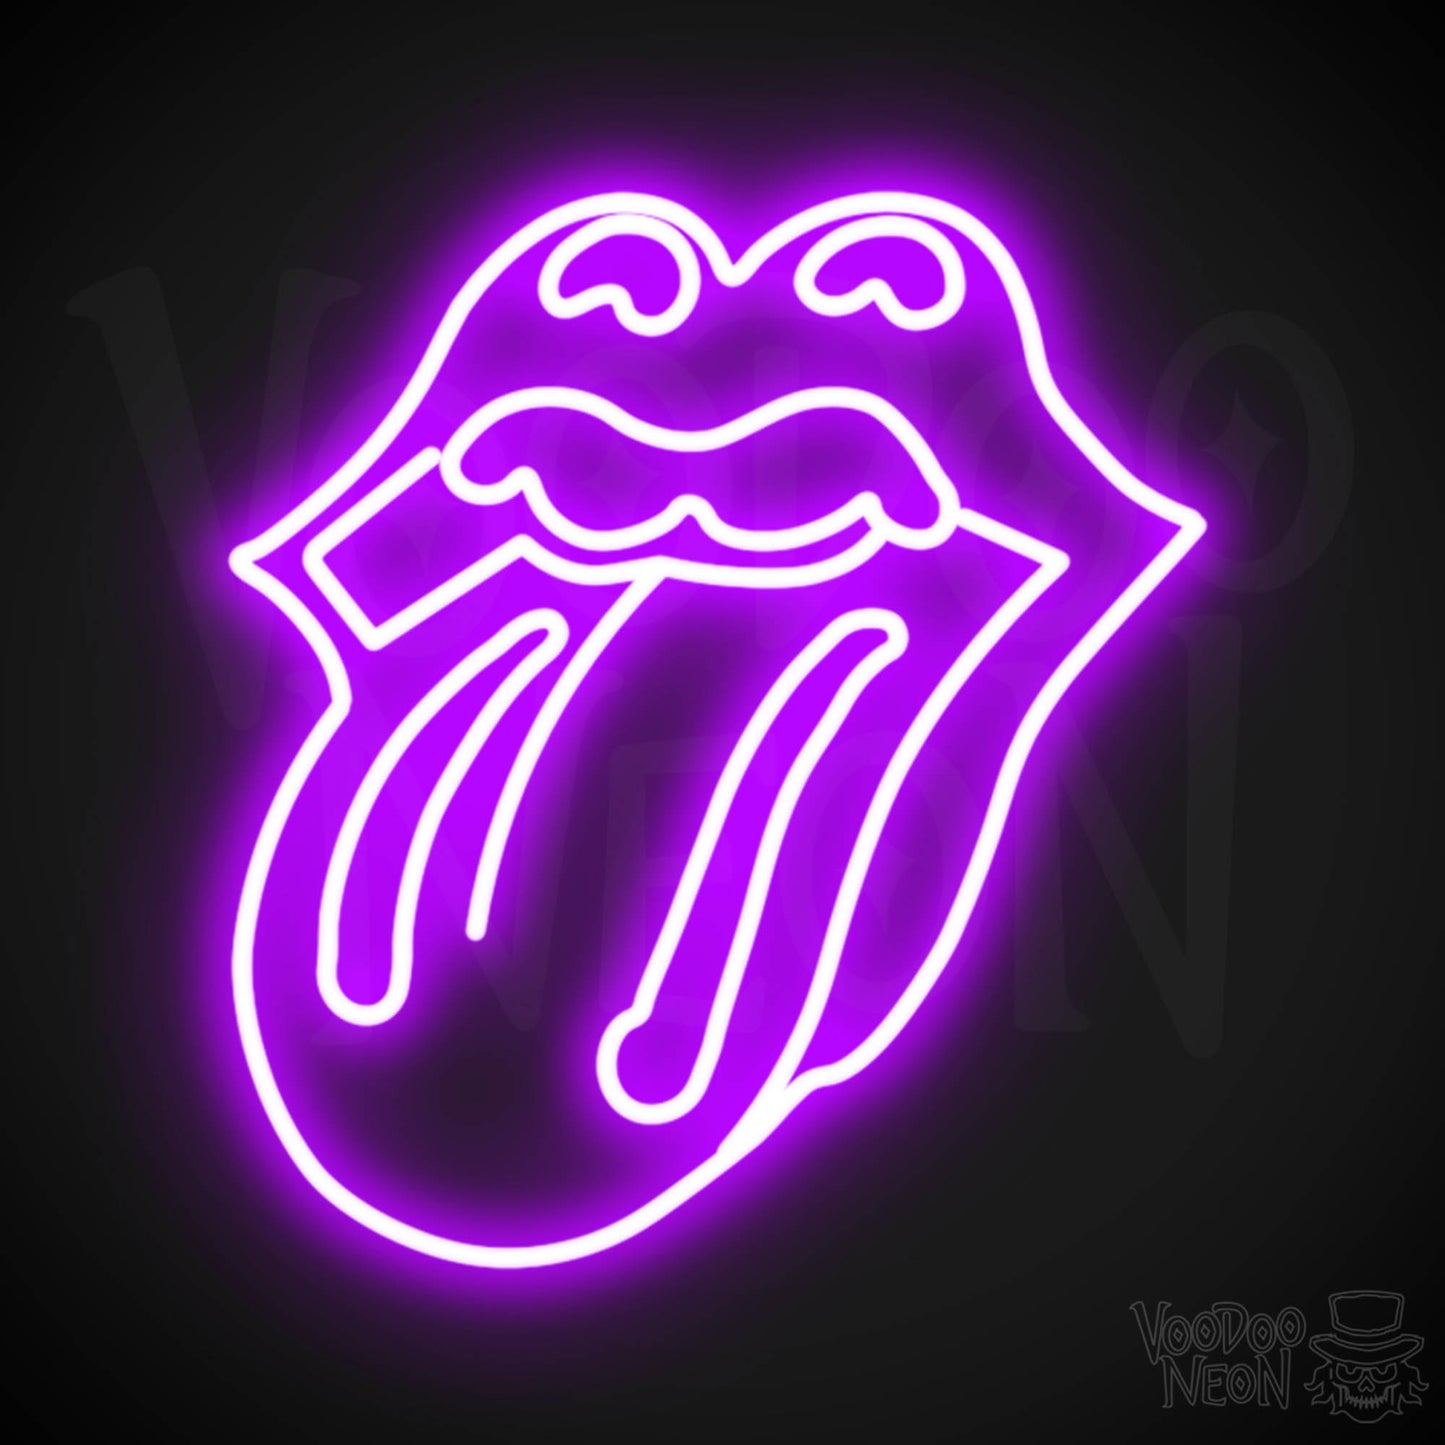 Rolling Stones Neon Sign - Rolling Stones Sign - Neon Rolling Stones Logo Wall Art - Color Purple